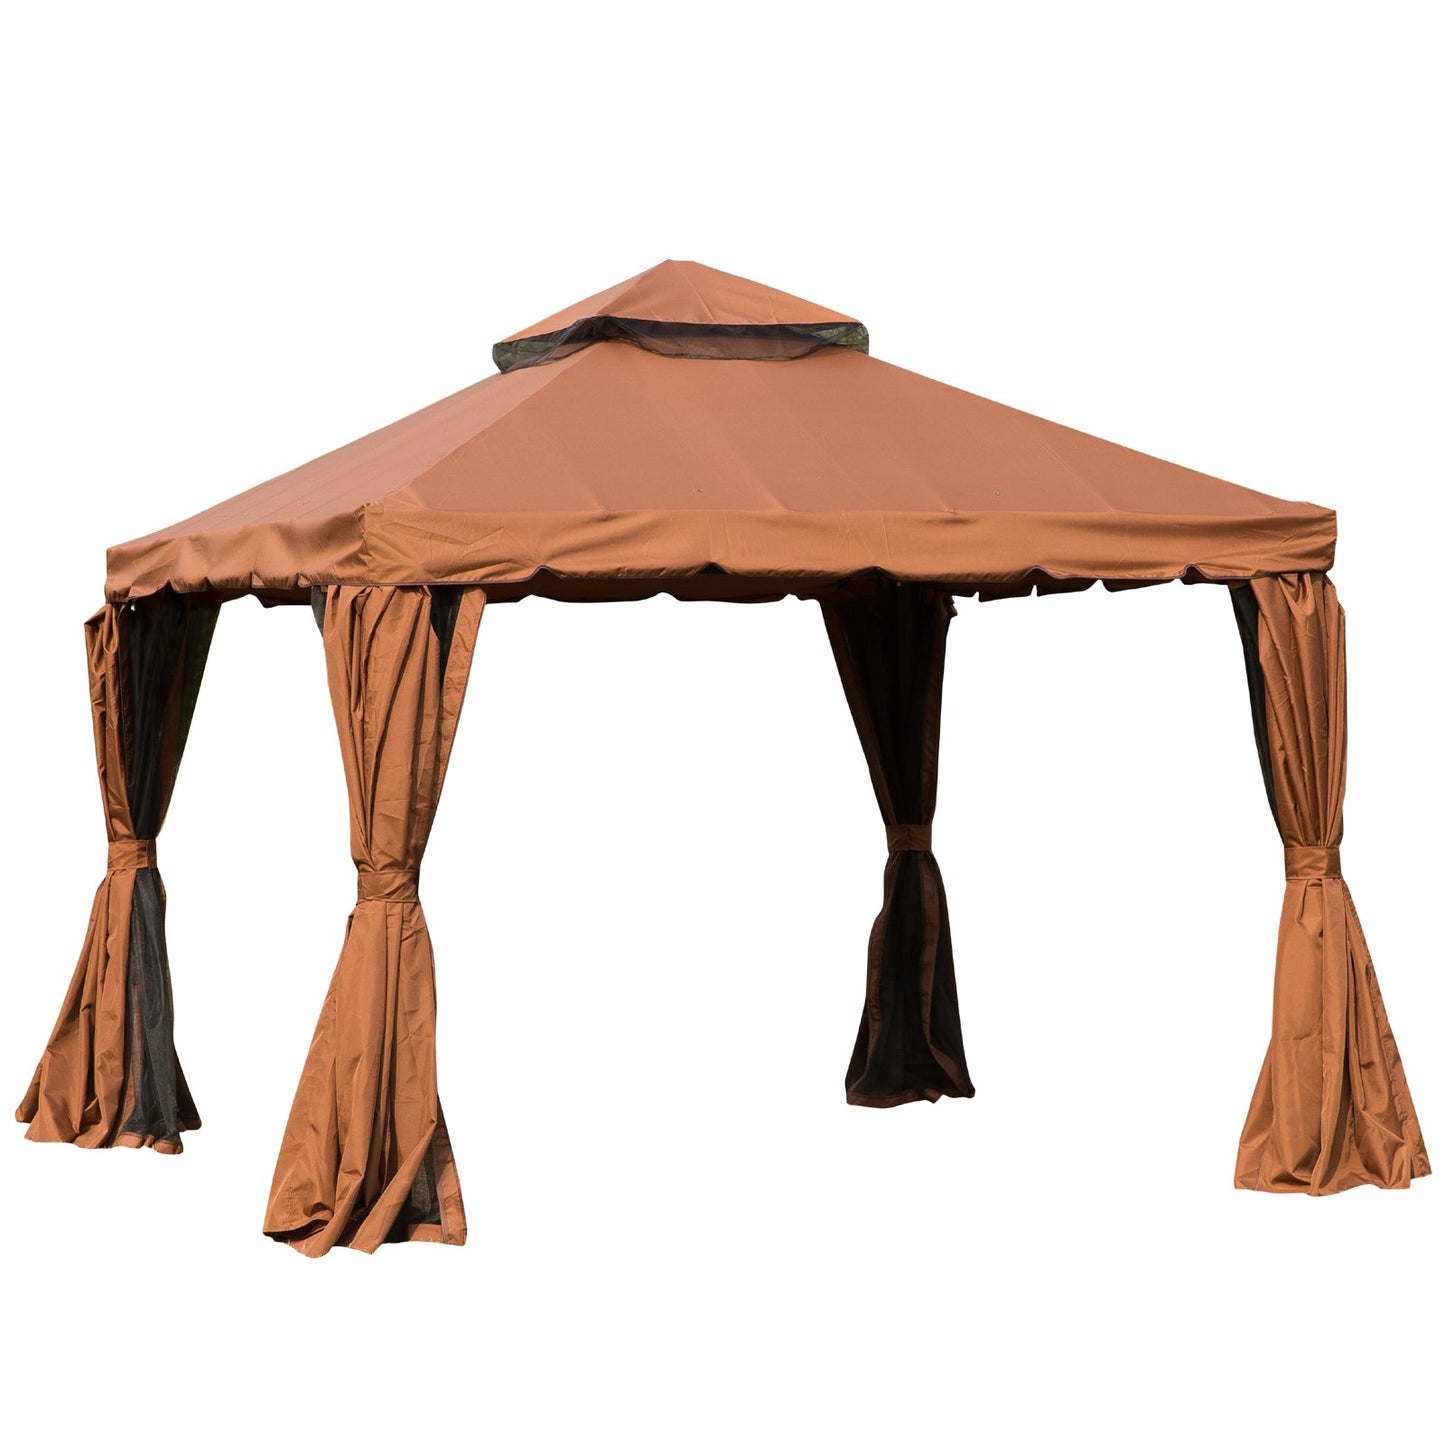 -Outsunny 10' x 10' Patio Gazebo Outdoor Canopy Shelter with Double Vented Roof, Netting and Curtains for Garden, Lawn, Backyard and Deck, Brown - Outdoor Style Company